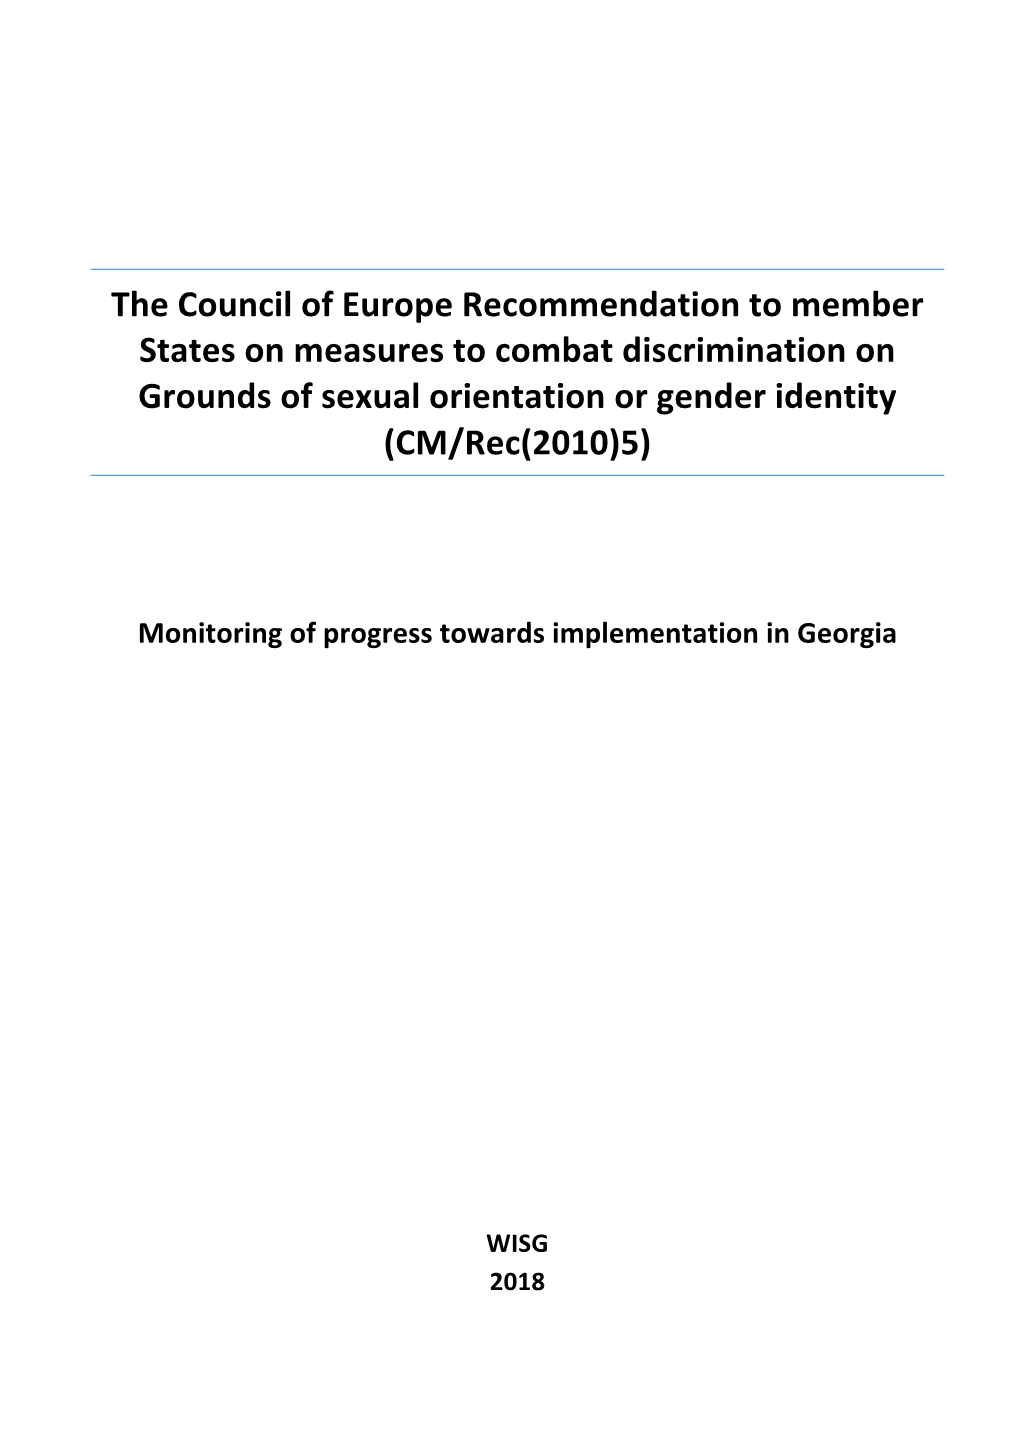 The Council of Europe Recommendation to Member States on Measures to Combat Discrimination on Grounds of Sexual Orientation Or Gender Identity (CM/Rec(2010)5)